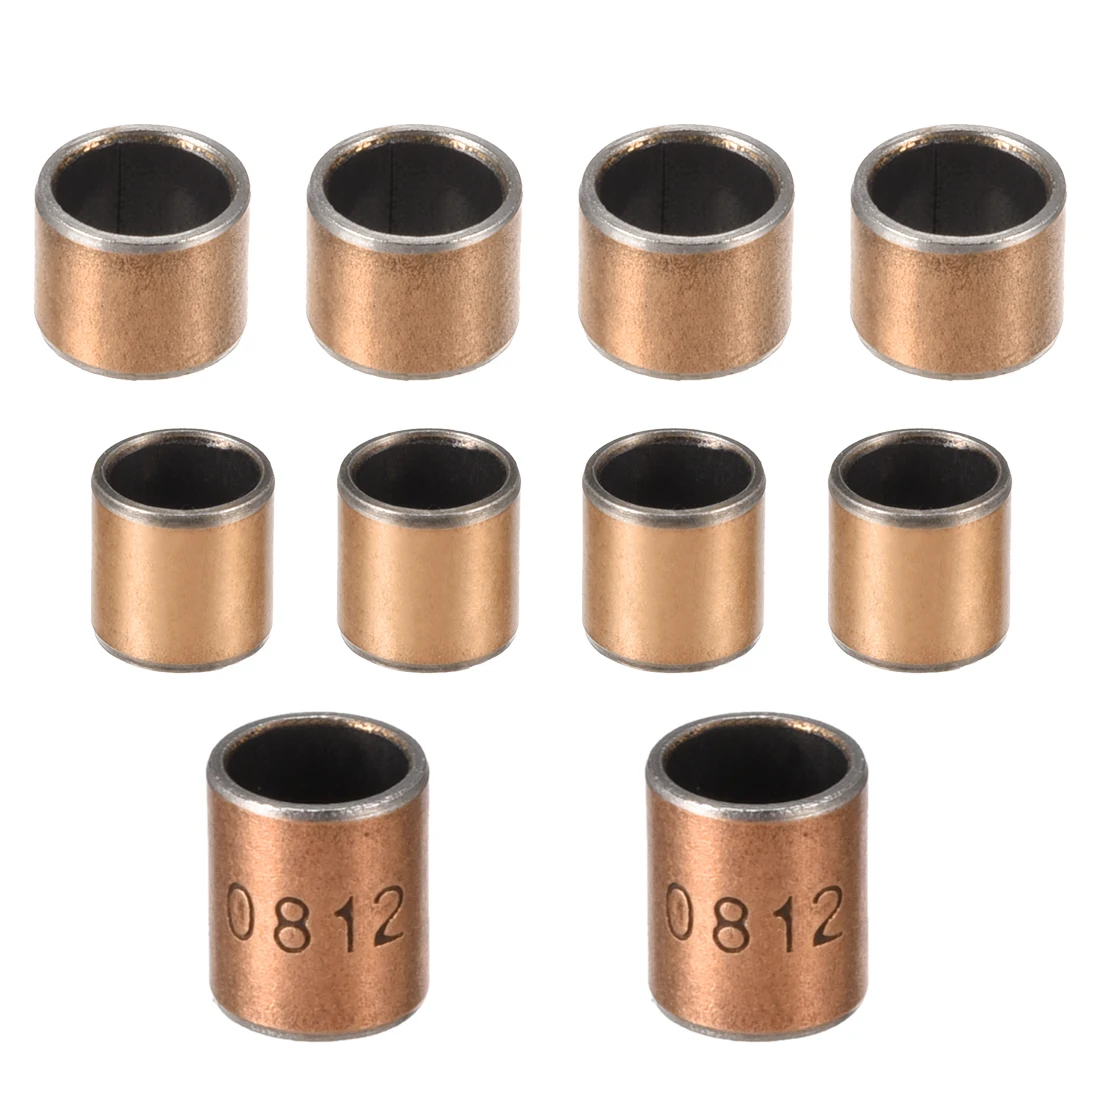 uxcell Sleeve (Plain) Bearings 8mm Bore 10mm OD Wrapped Oilless Self-lubricating Bushings Length 5mm 8mm 10mm 12mm 15mm